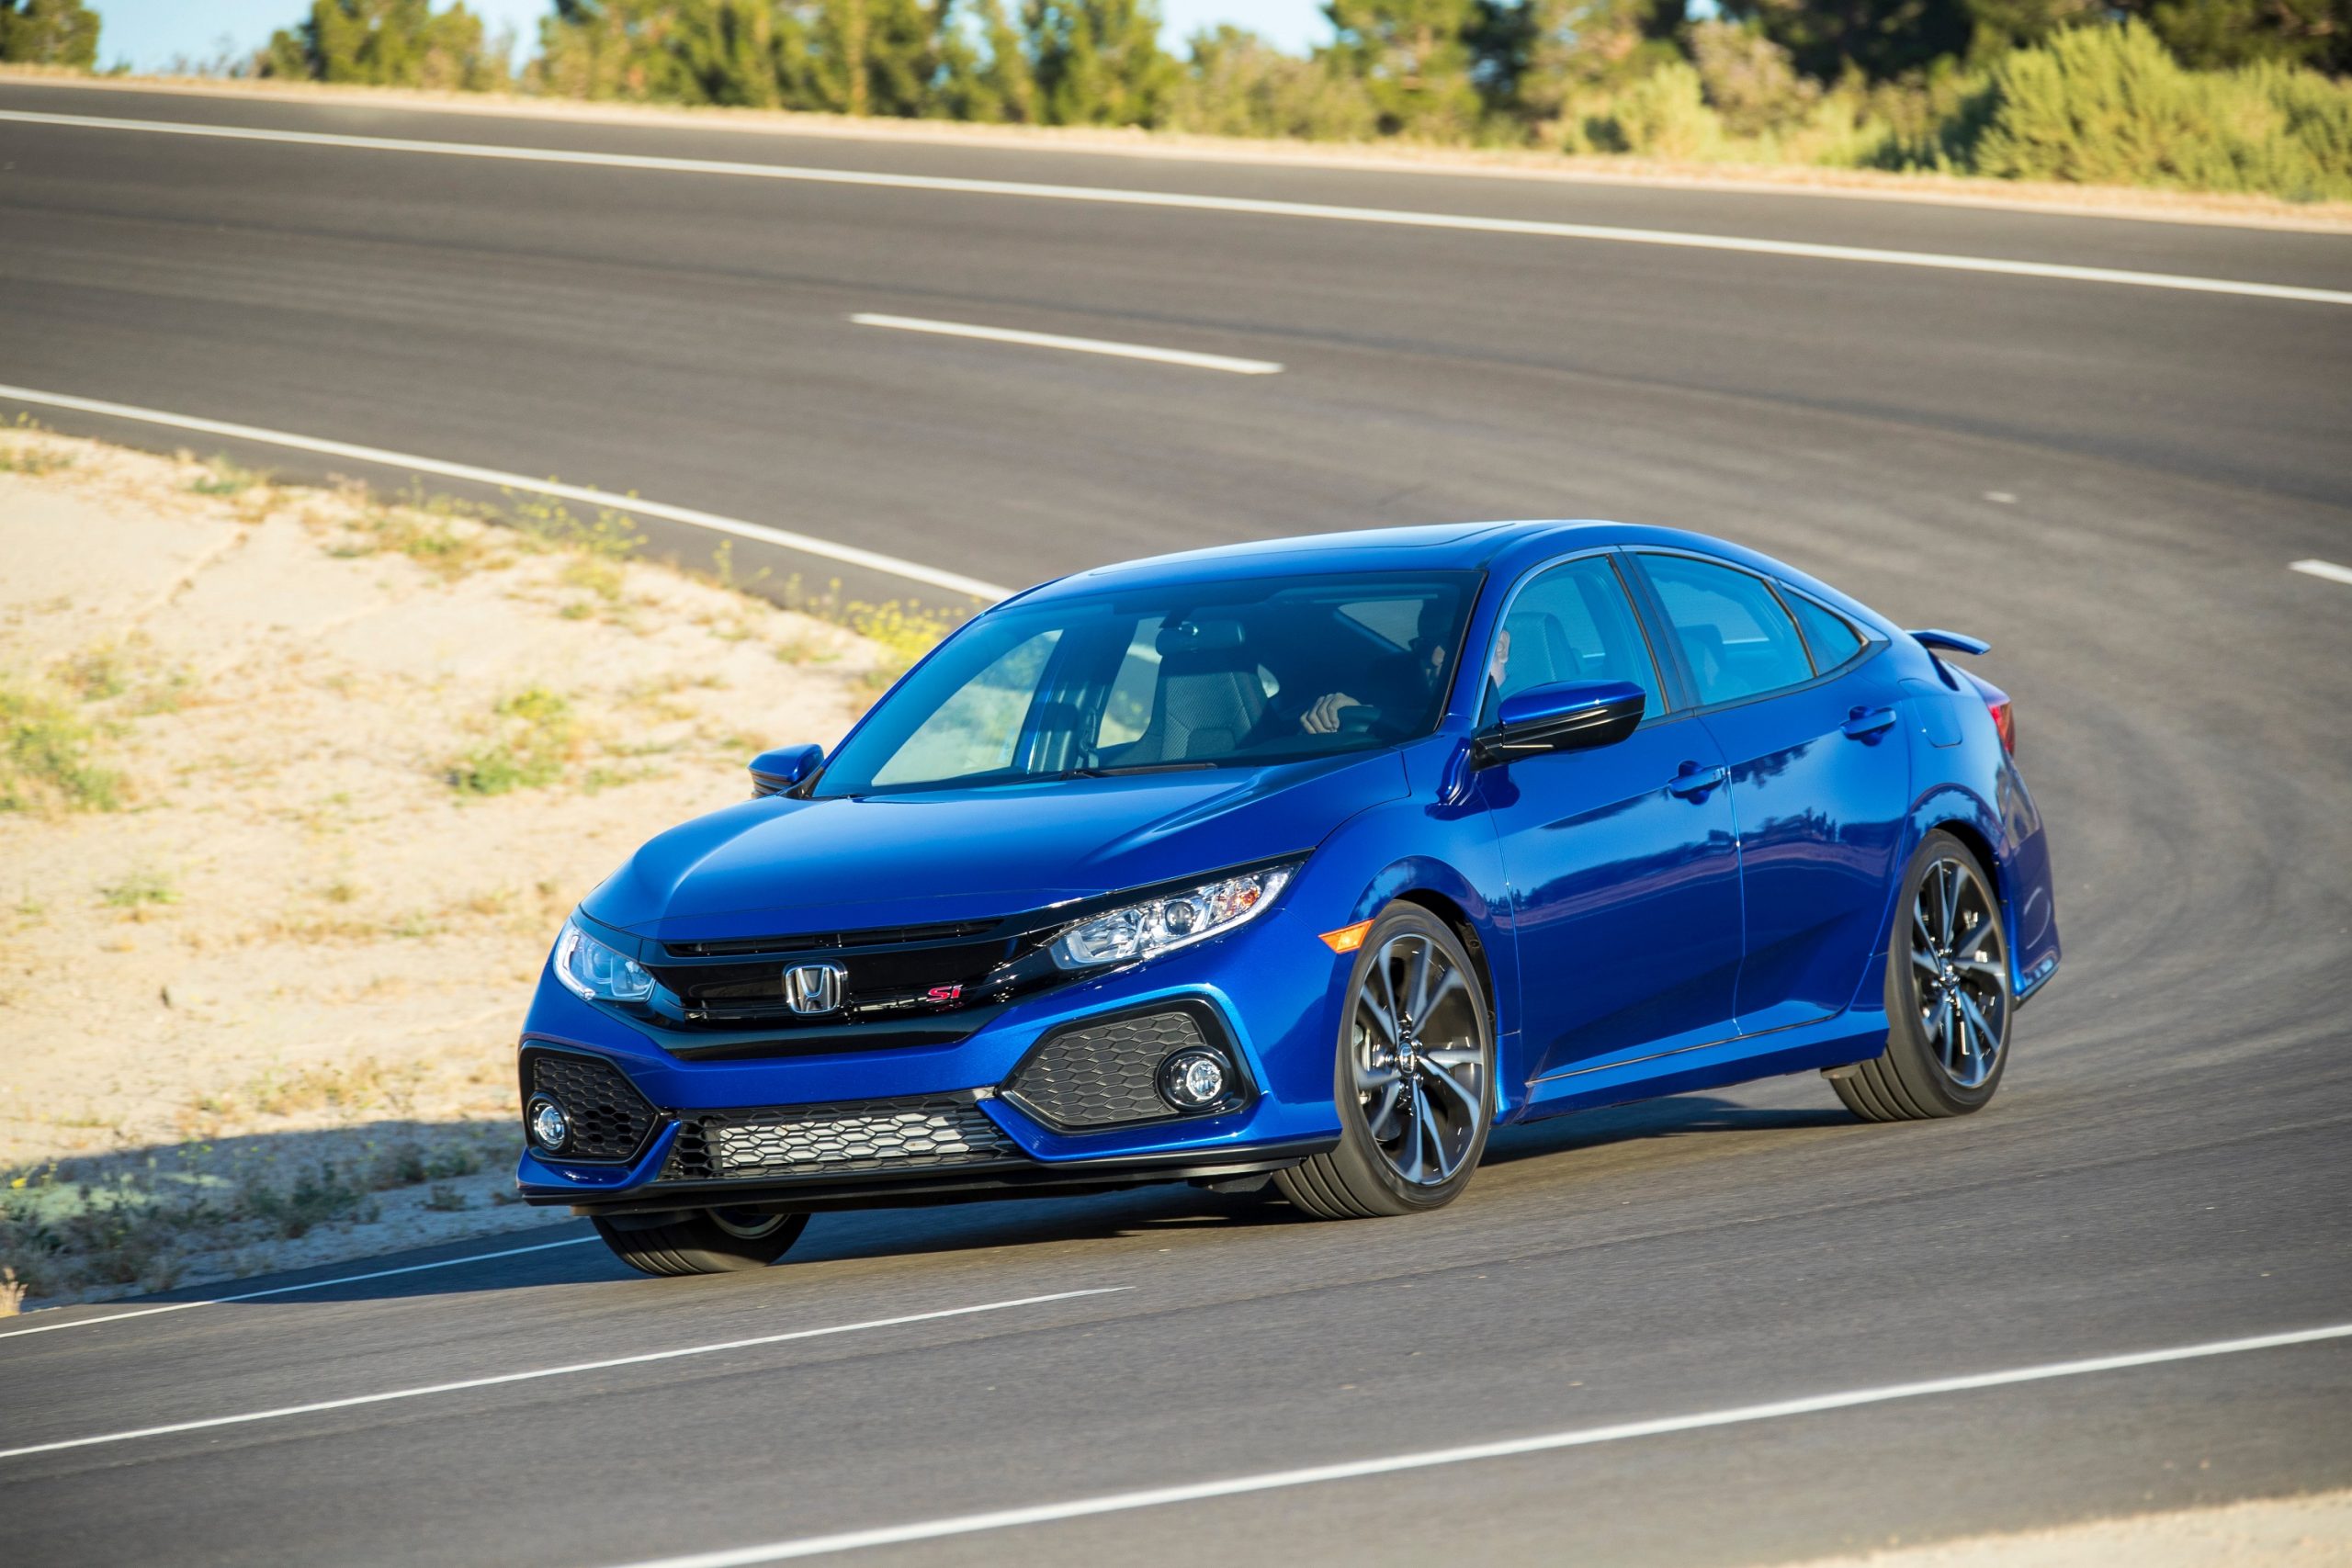 The 2019 Civic Si on a twisty road shot from the front 3/4